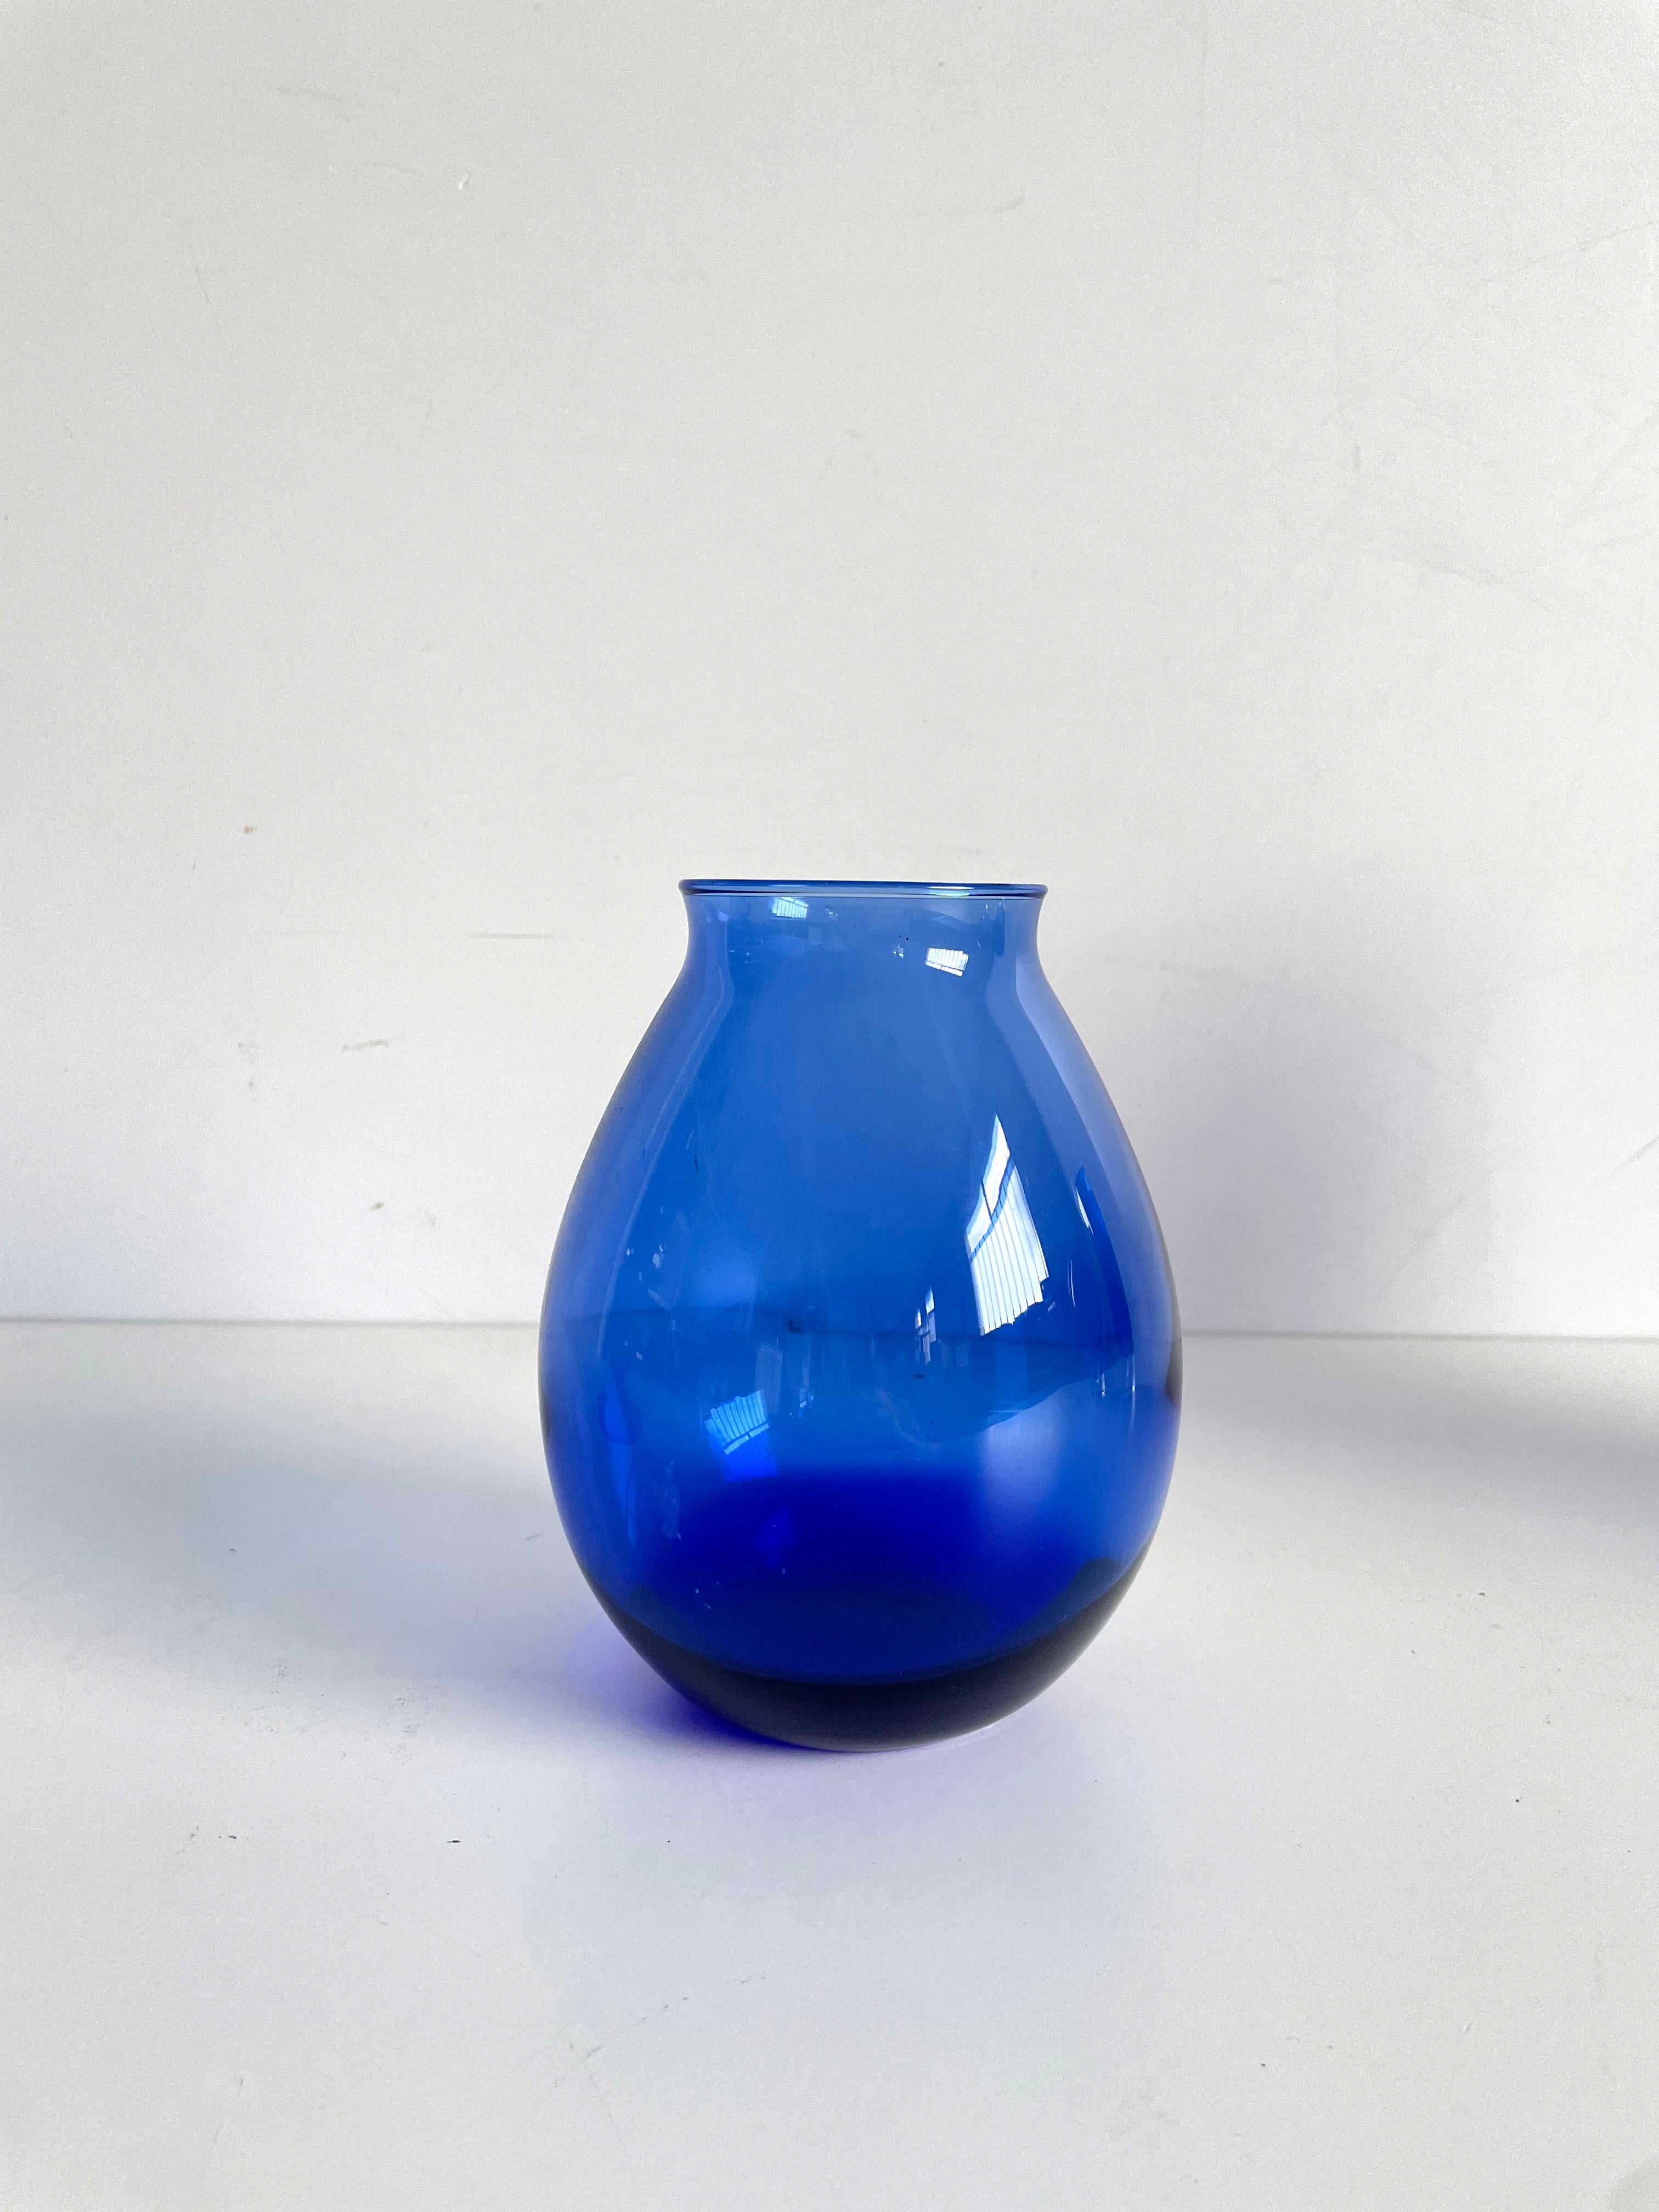 Collection of Scandinavian Art Glass, Set of 4 diverse Blue Glass Vases For Sale 3